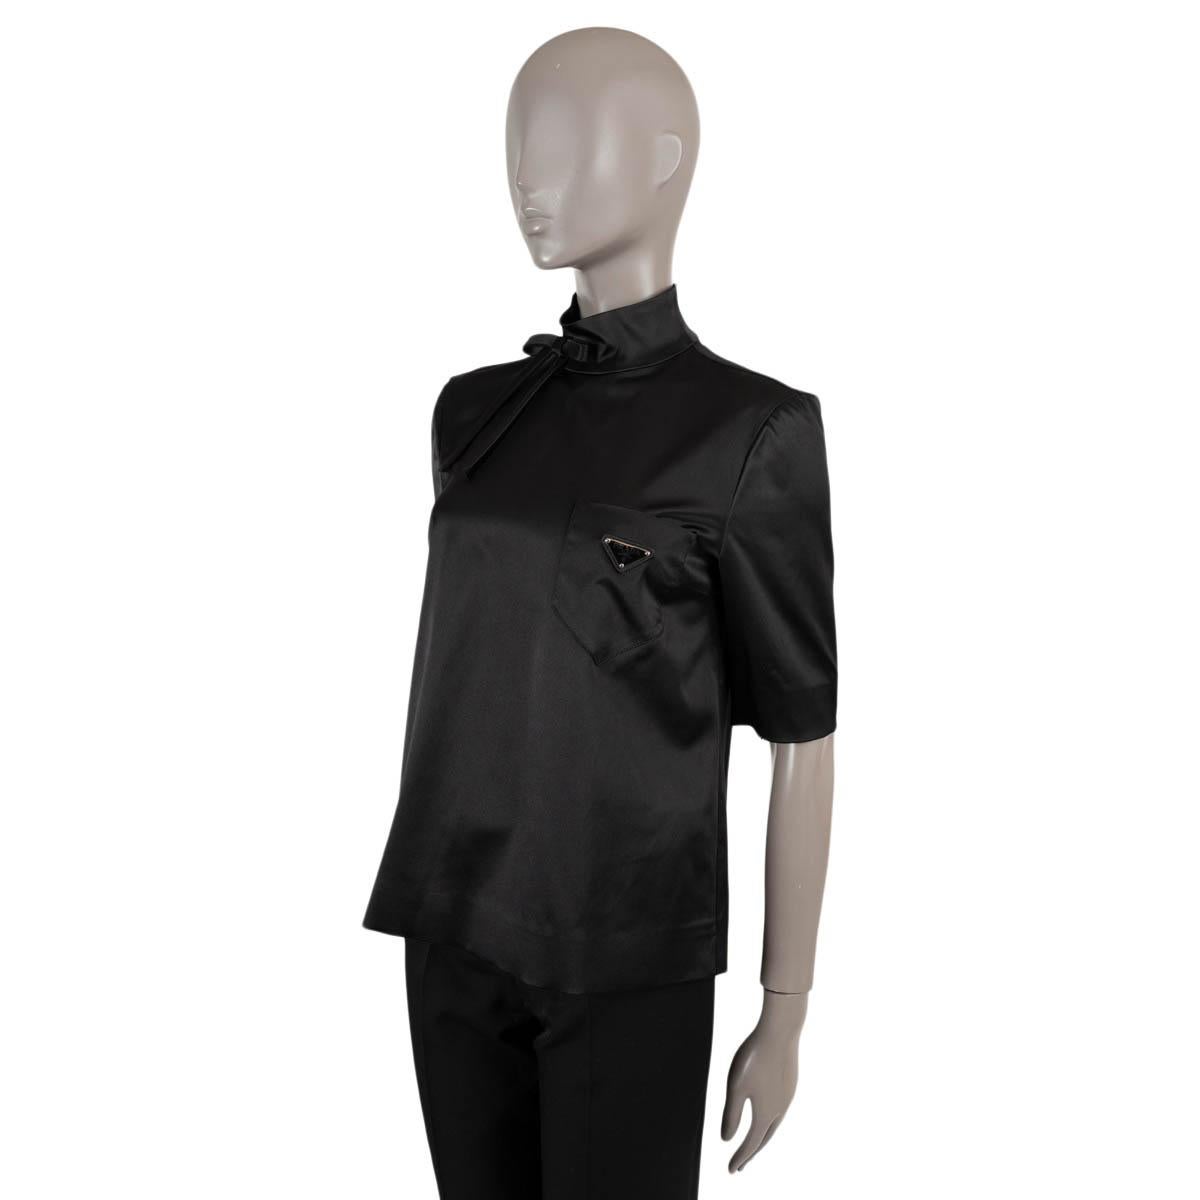 100% authentic Prada half sleeve blouse in black Duchesse silk (100%). Features a high-neck with bow and chest pocket with triangle logo. Opens with fabric covered buttons in the back. Has been worn and is in excellent condition.

2019